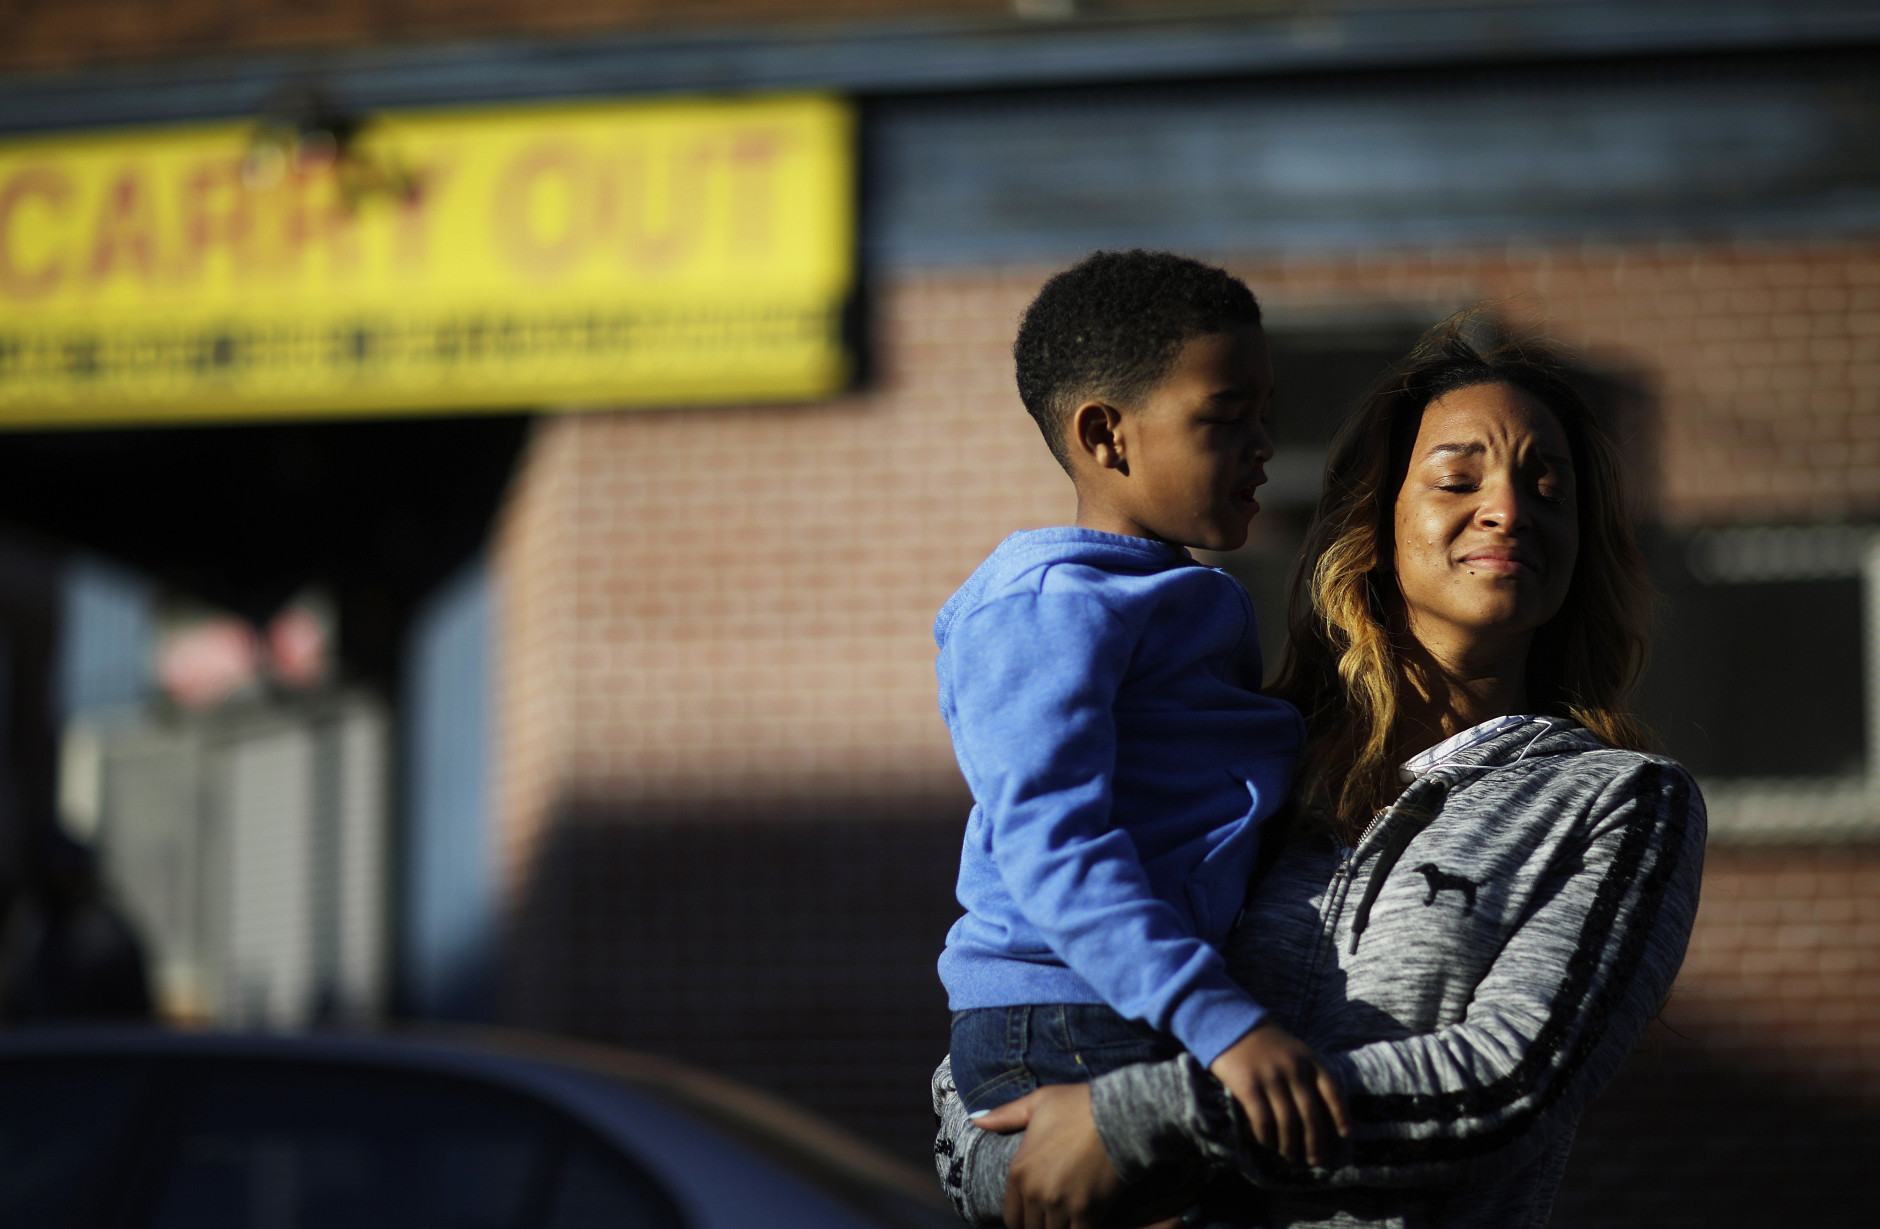 Cierra Powell fights back tears as she holds her son, Keon Lovitt, 6, as they pause to listen to an outdoor church service a block from Monday's riots that followed the funeral for Freddie Gray, who died in police custody, Tuesday, April 28, 2015, in Baltimore. (AP Photo/David Goldman)